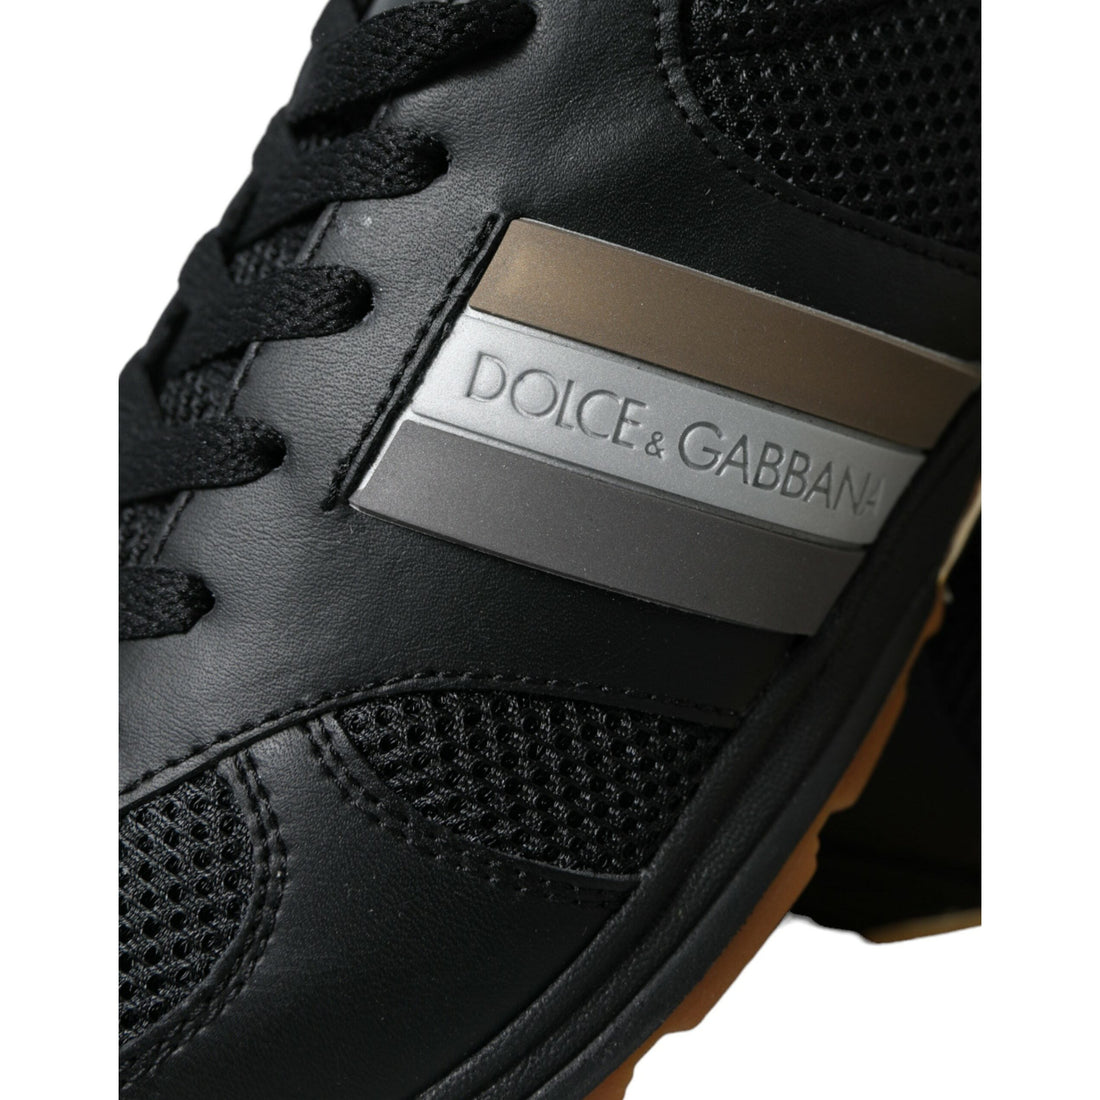 Dolce & Gabbana Black Leather Low Top  Sneakers Shoes